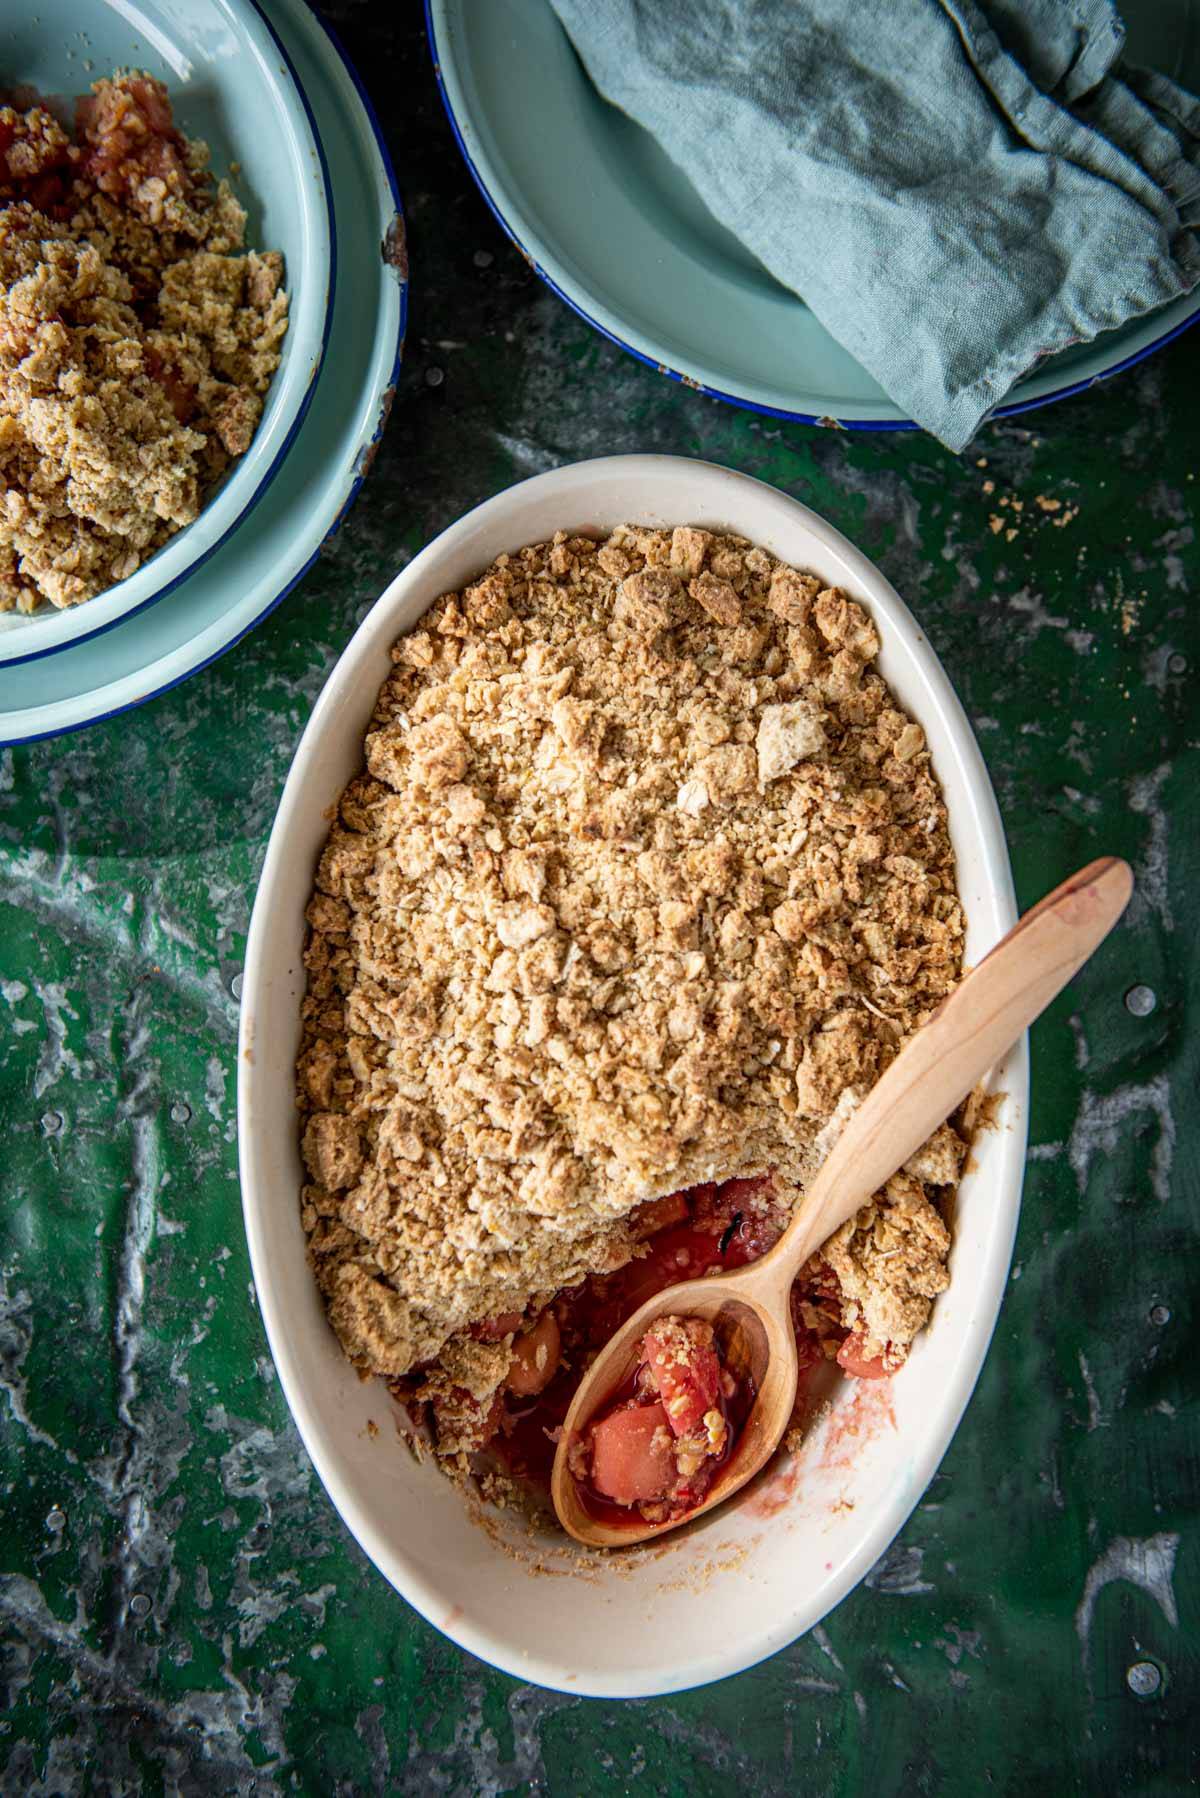 Blood Orange and Apples Crumble | Chew Town Food Blog